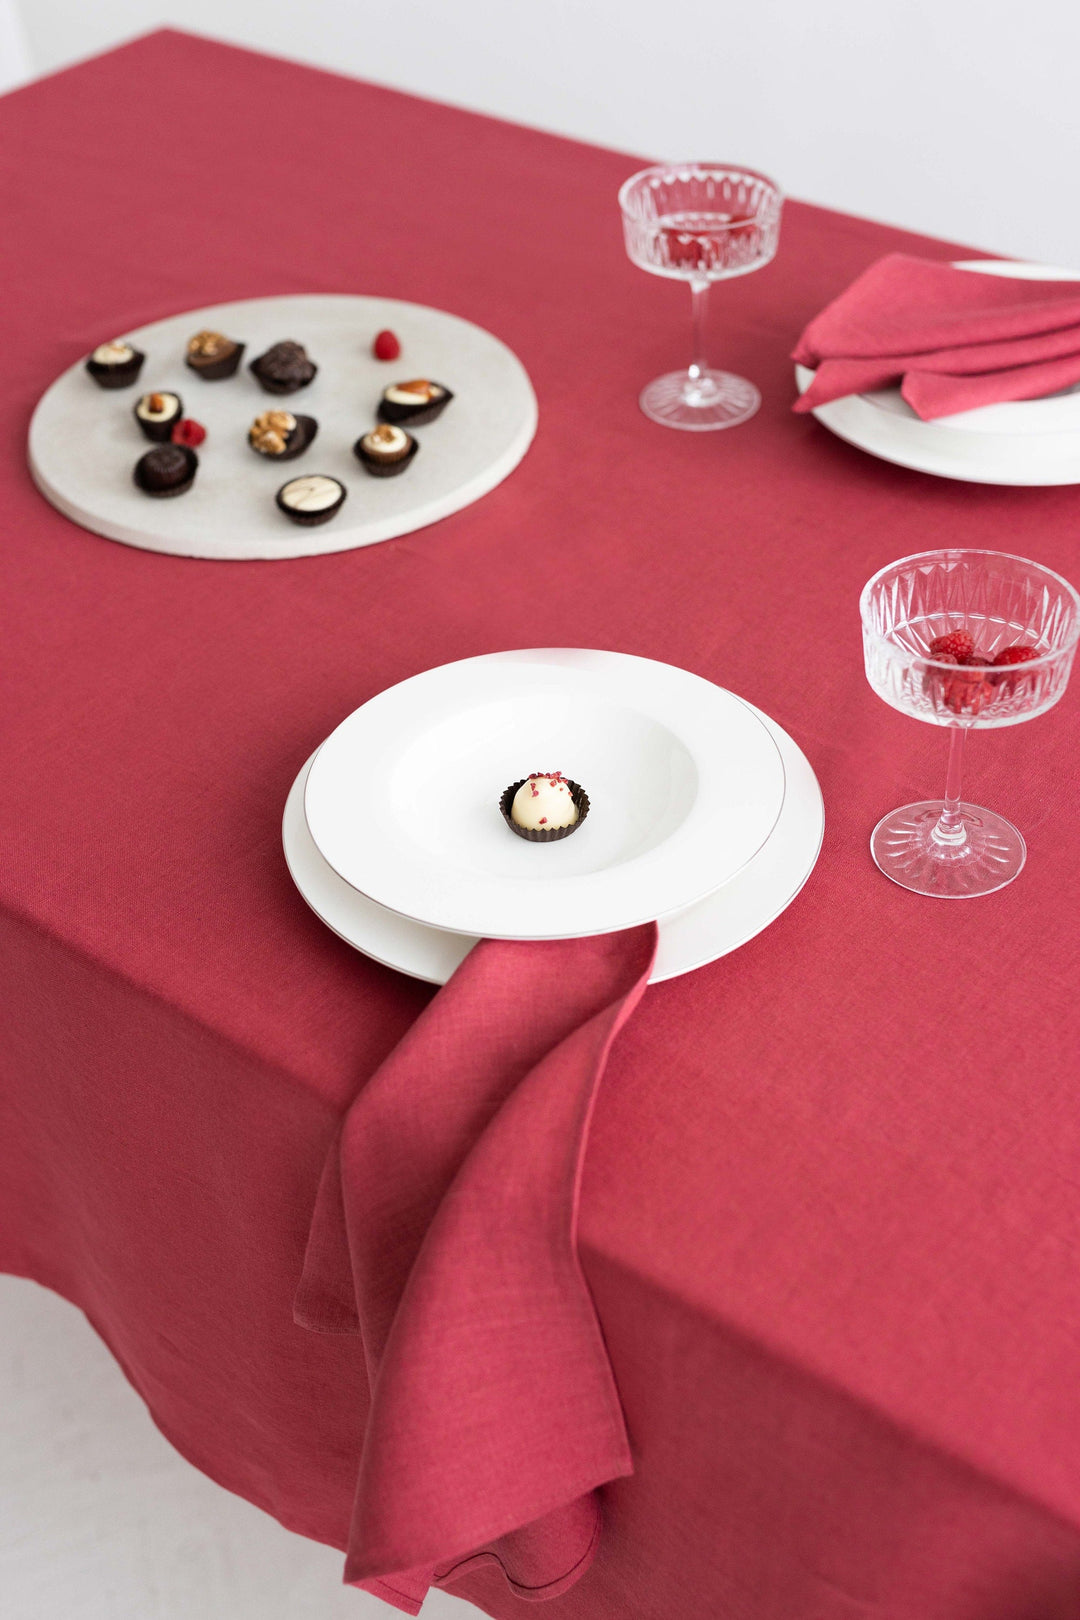 Linen Tablecloth In Raspberry Color Decorated On Table 1 - Daily Linen